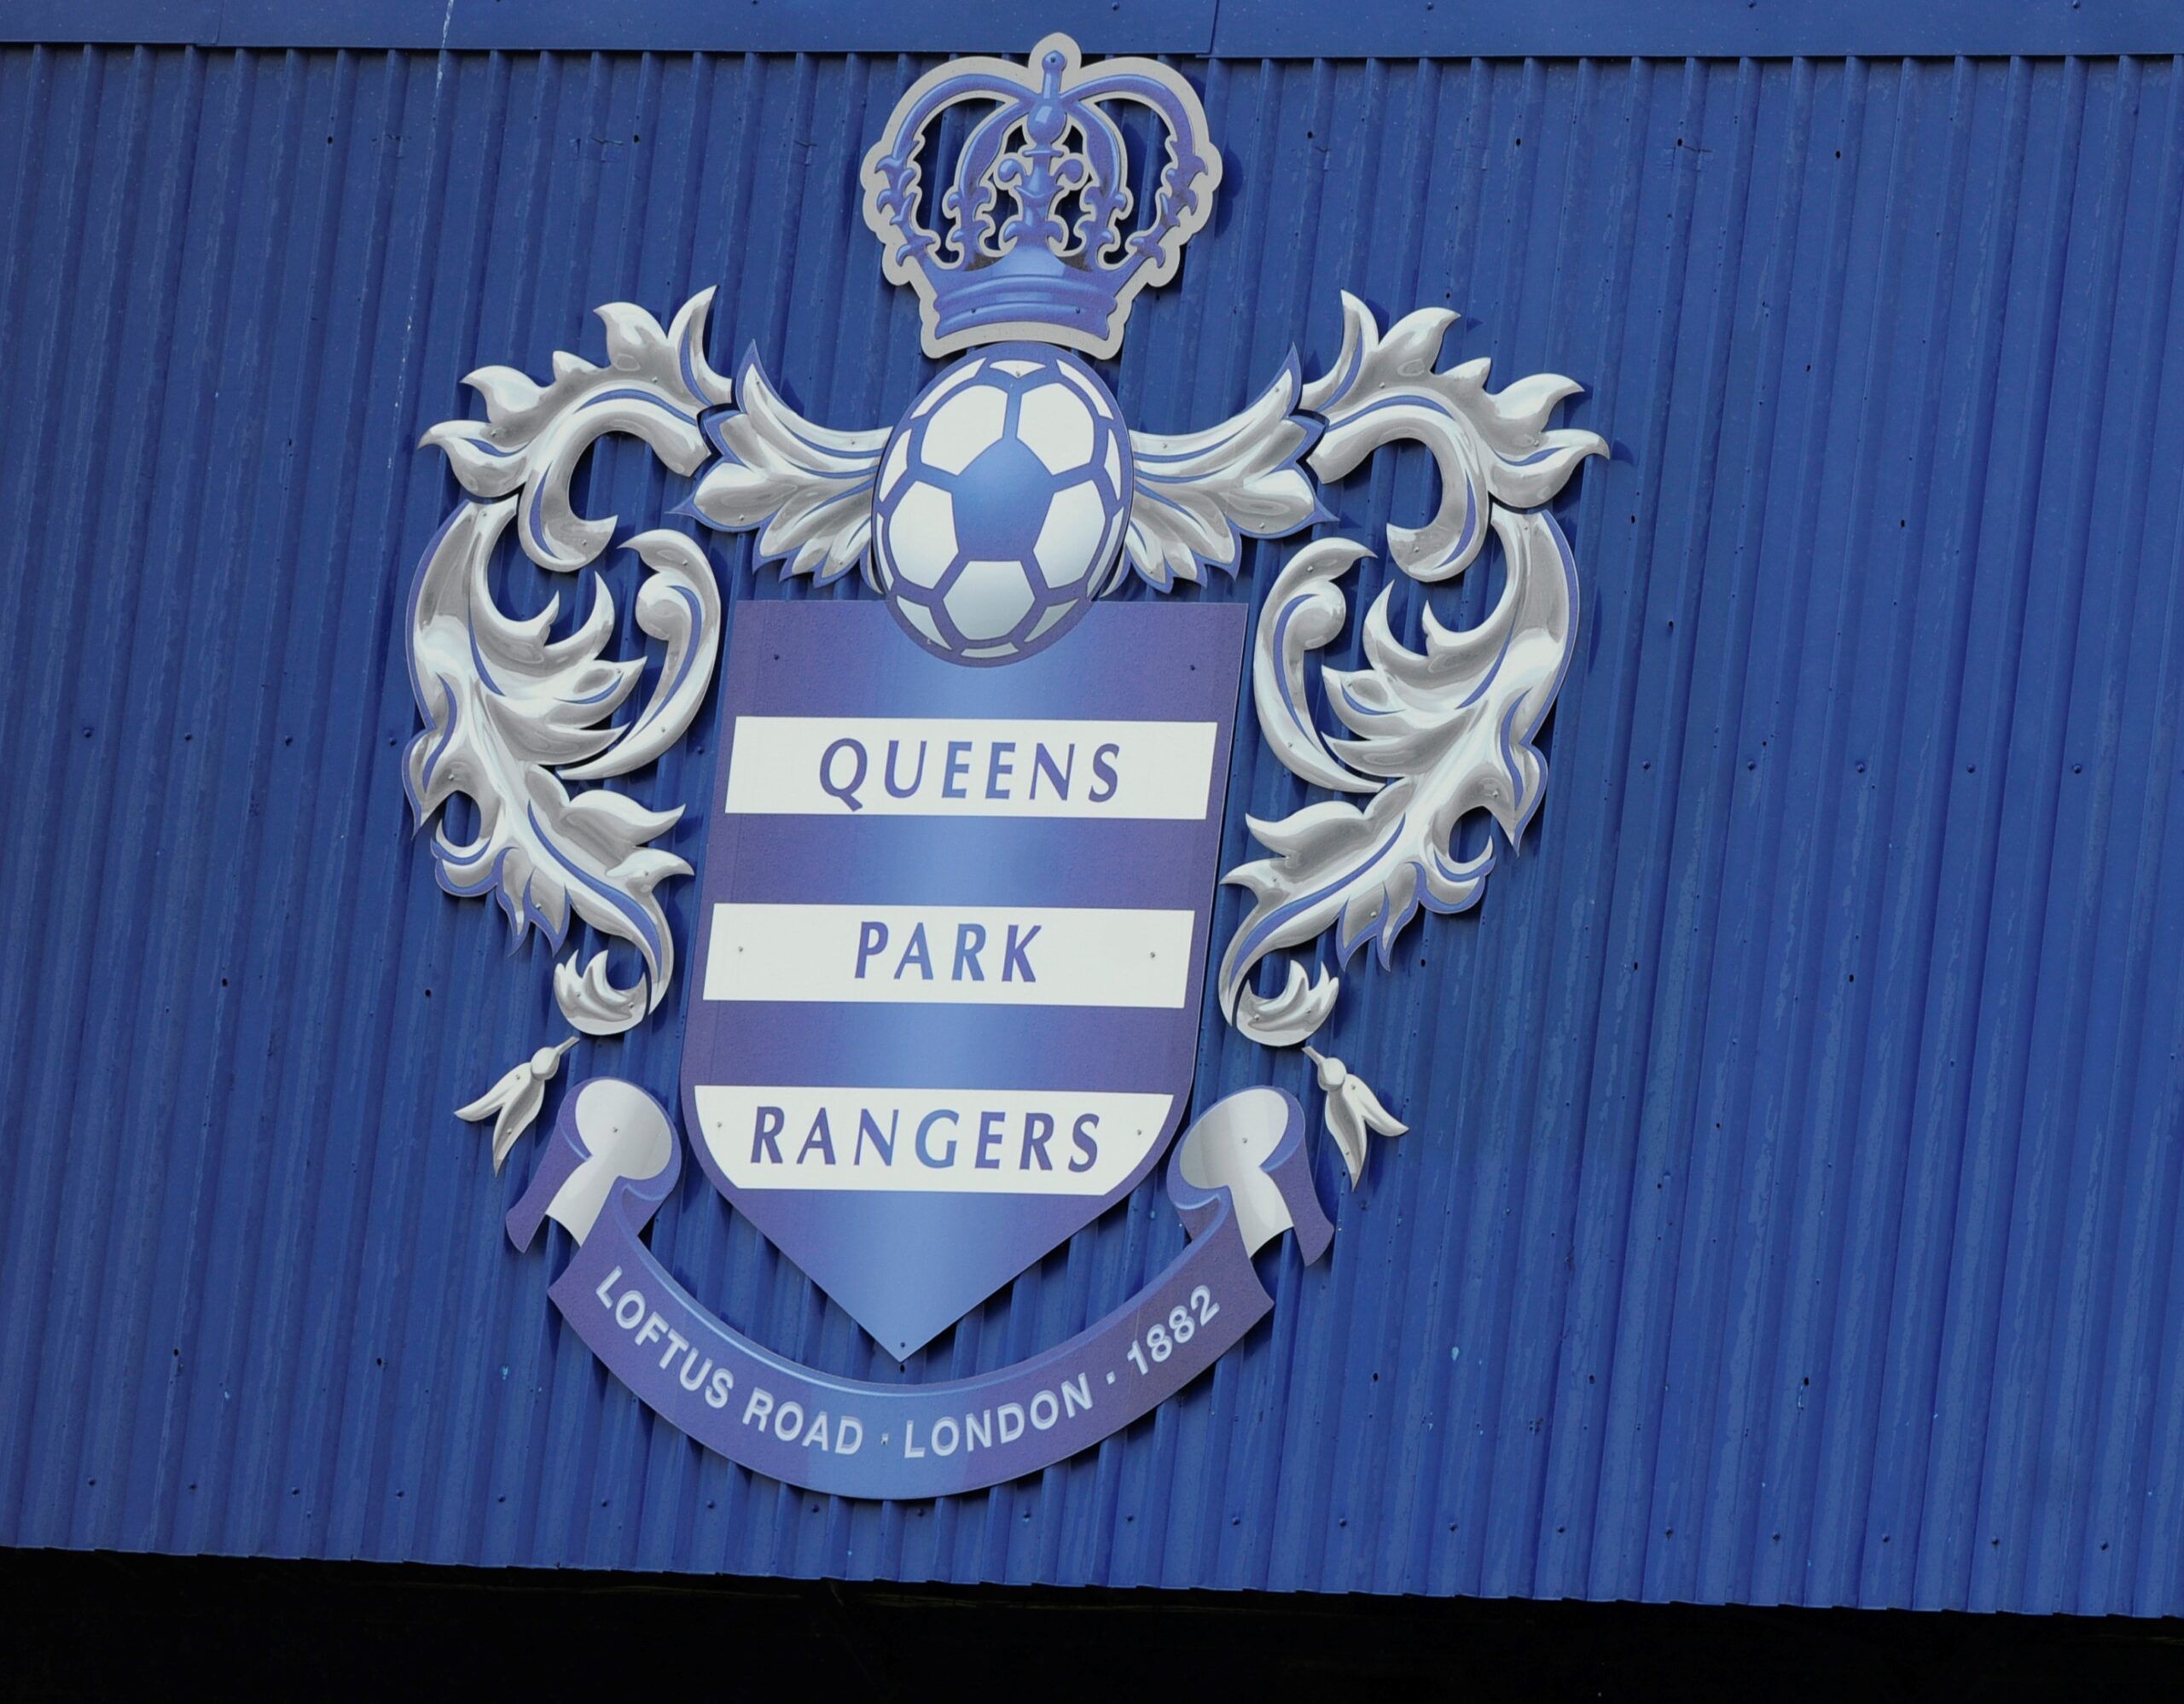 Football - Queens Park Rangers v Newcastle United - Coca-Cola Football League Championship  - Loftus Road - 09/10 - 2/5/10 
General view inside the stadium / team badge on stand 
Mandatory Credit: Action Images / Tony O'Brien